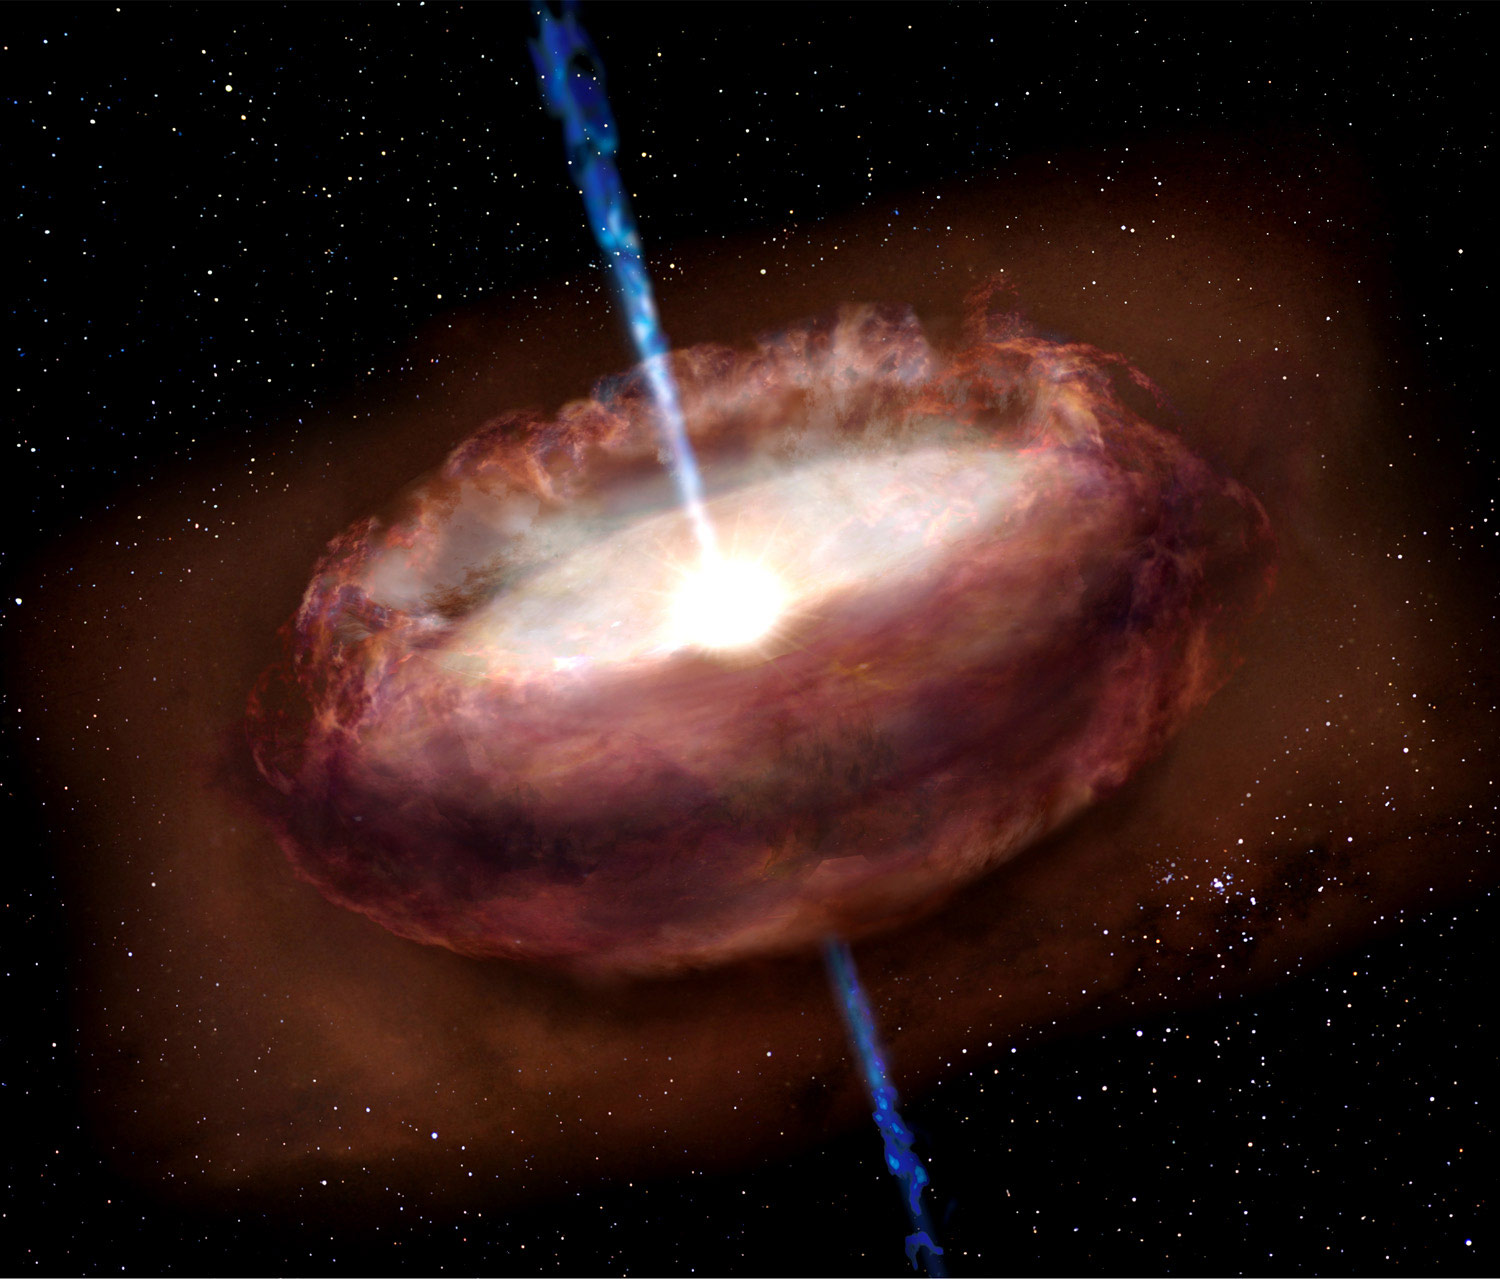 Diamond dust surrounds young galactic stars